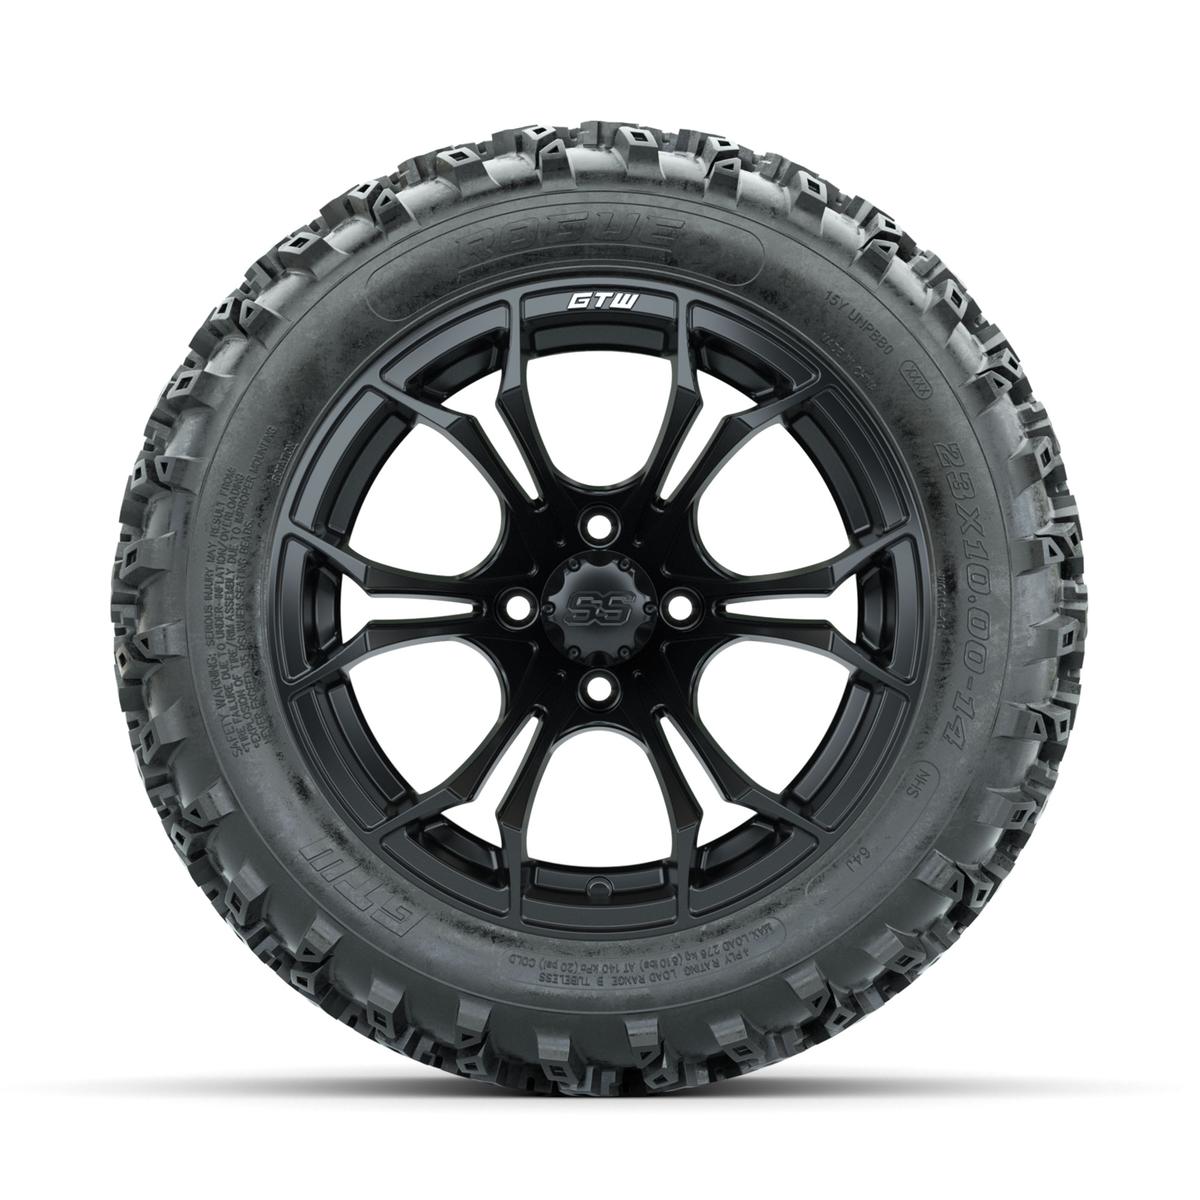 GTW Spyder Matte Black 14 in Wheels with 23x10.00-14 Rogue All Terrain Tires – Full Set